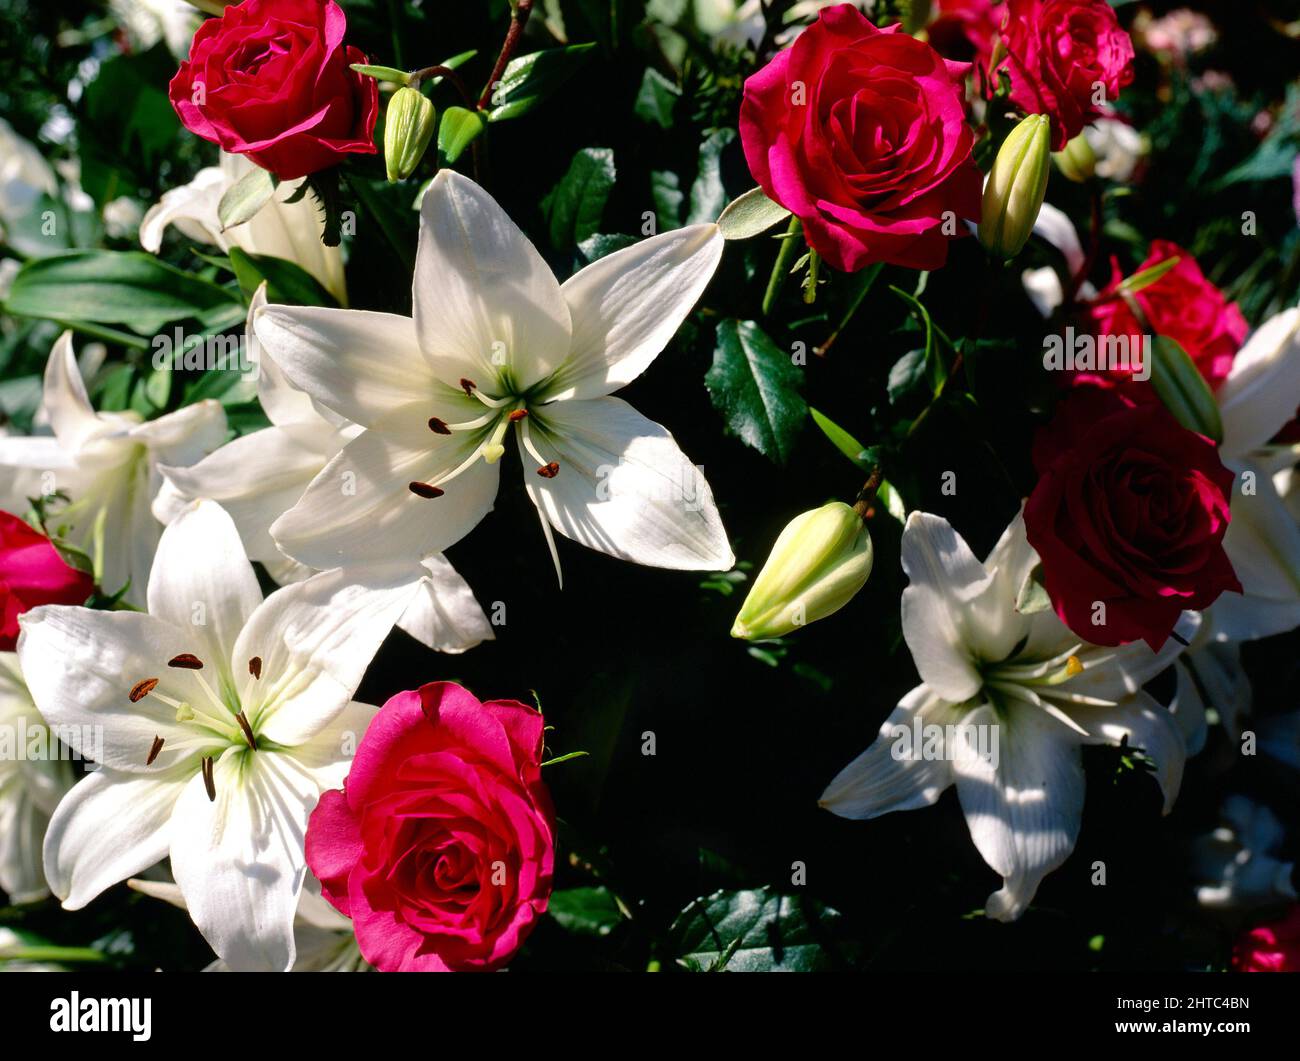 White Lily and Red Rose Flower Arrangement Stock Photo